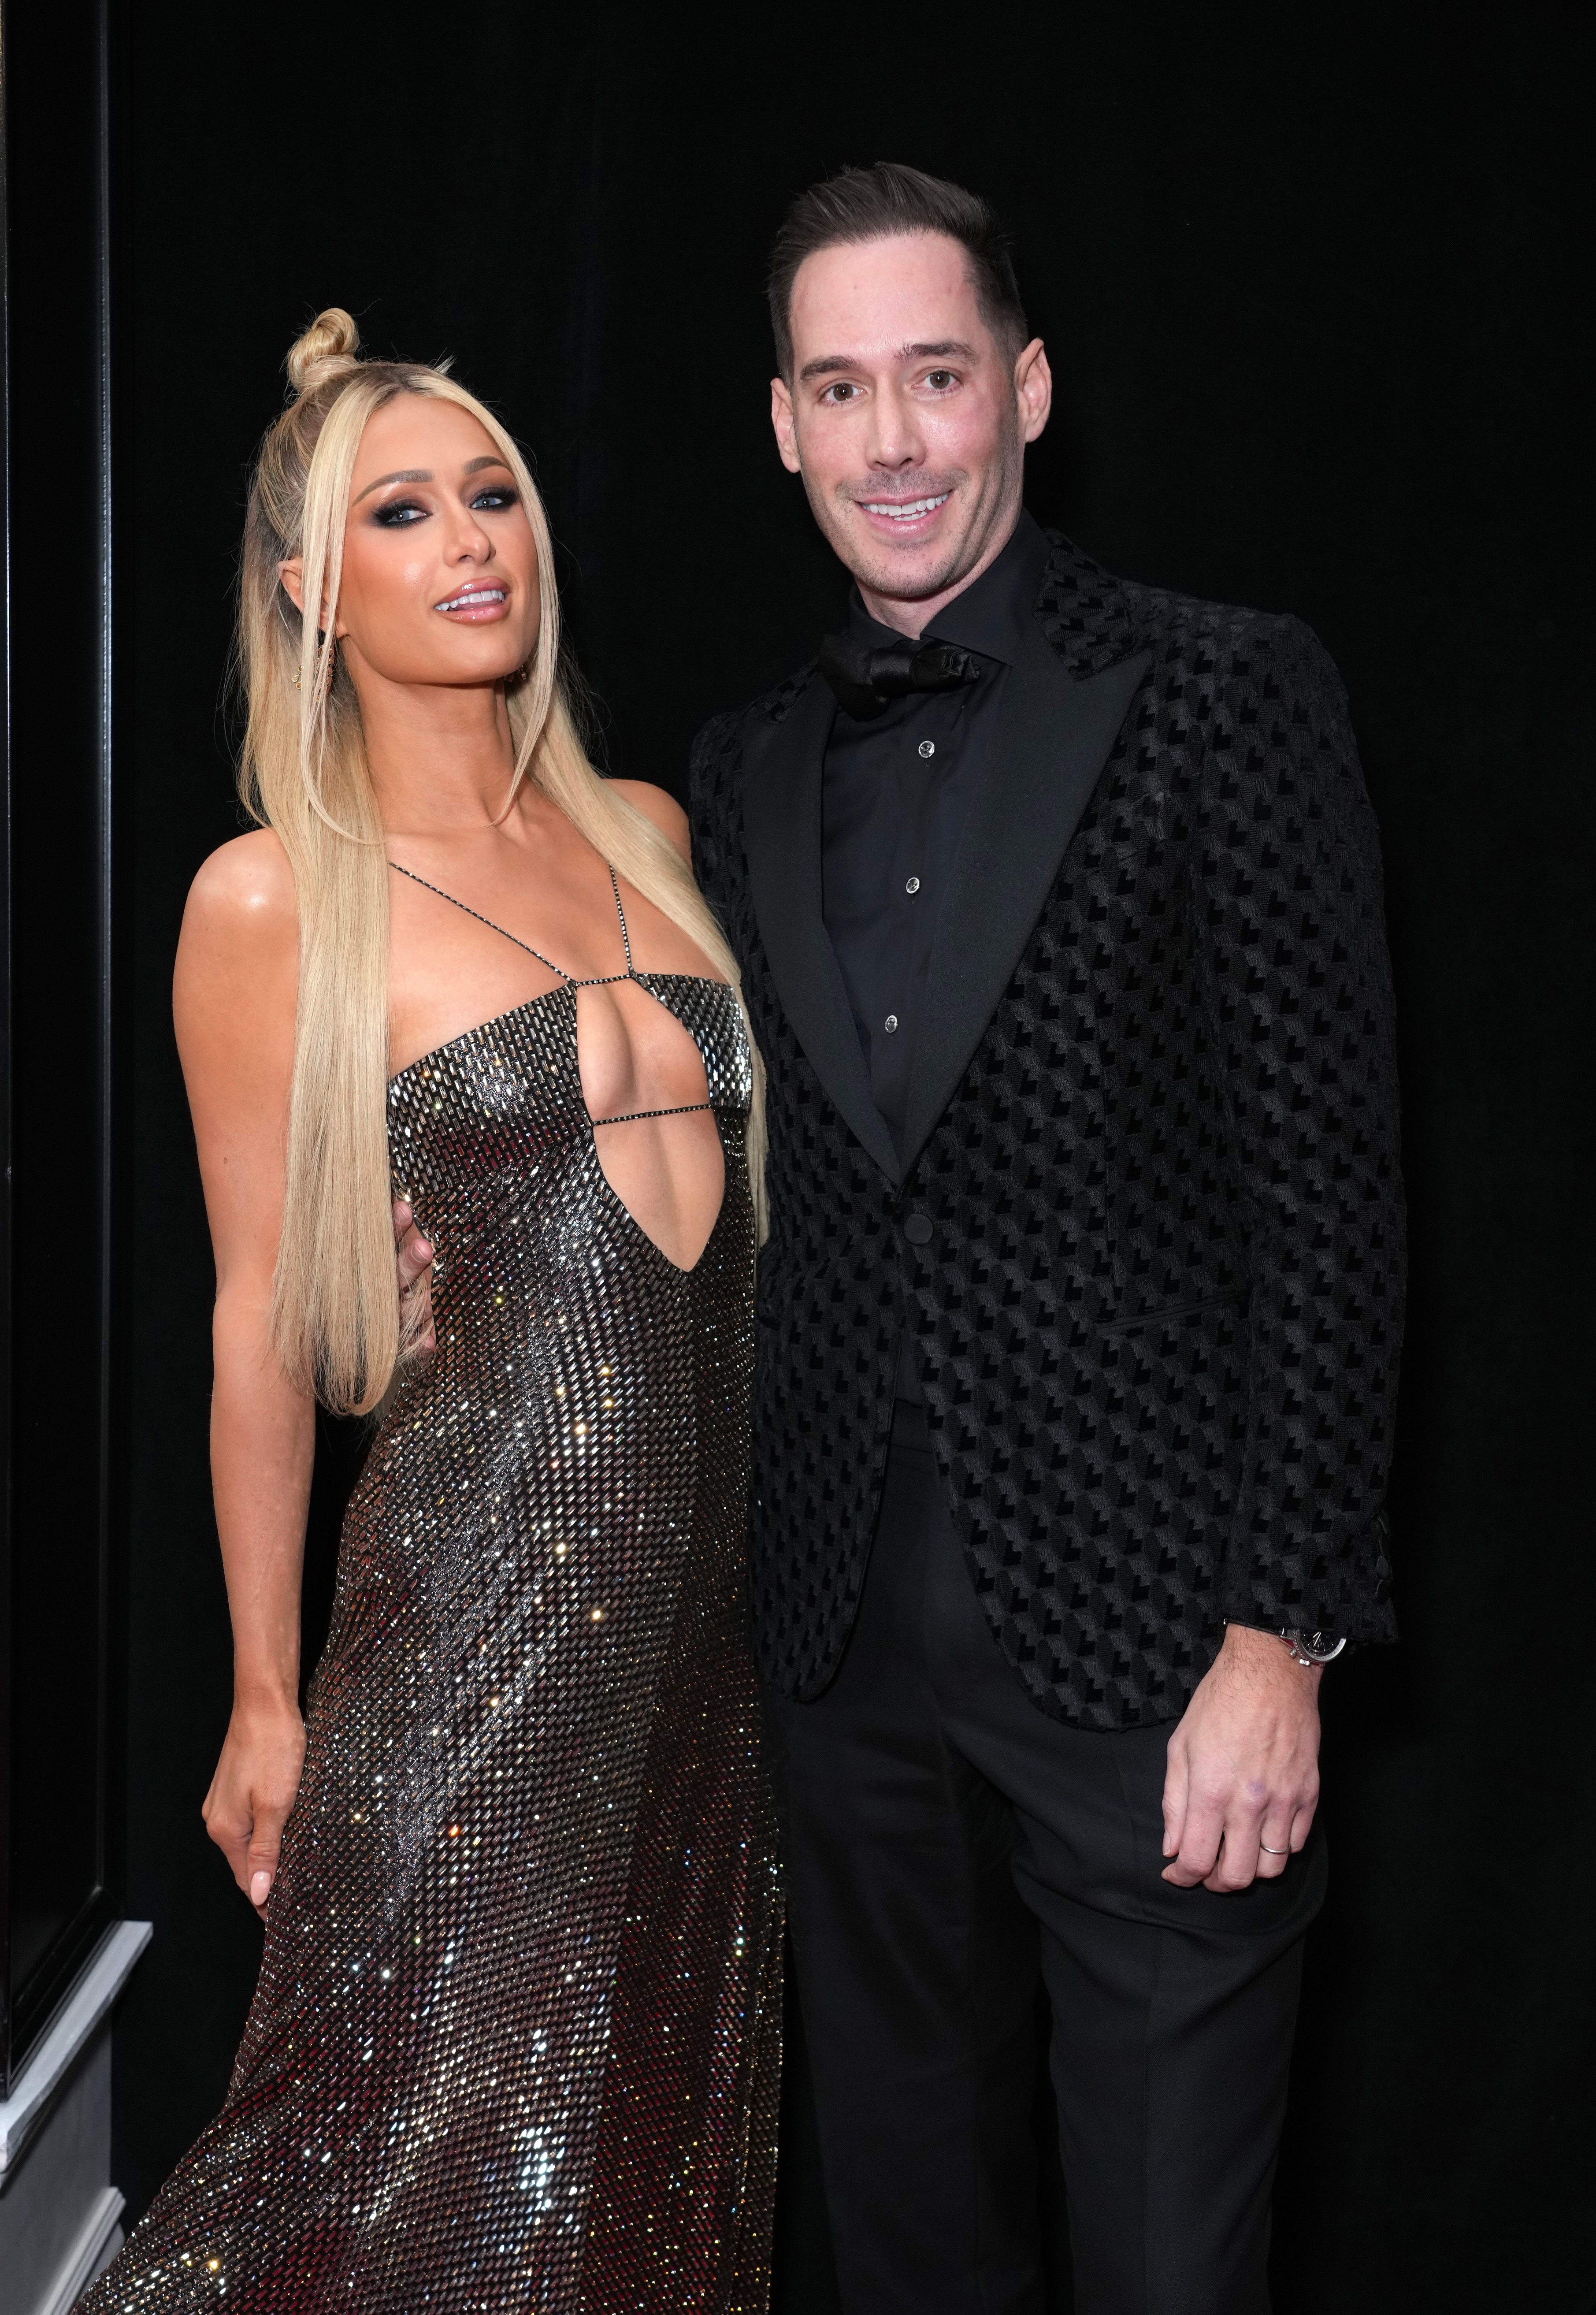 Paris Hilton and her husband Carter Reum smile for the camera at an event. Paris is wearing a long sparkly dress and Carter is in a suit sans tie